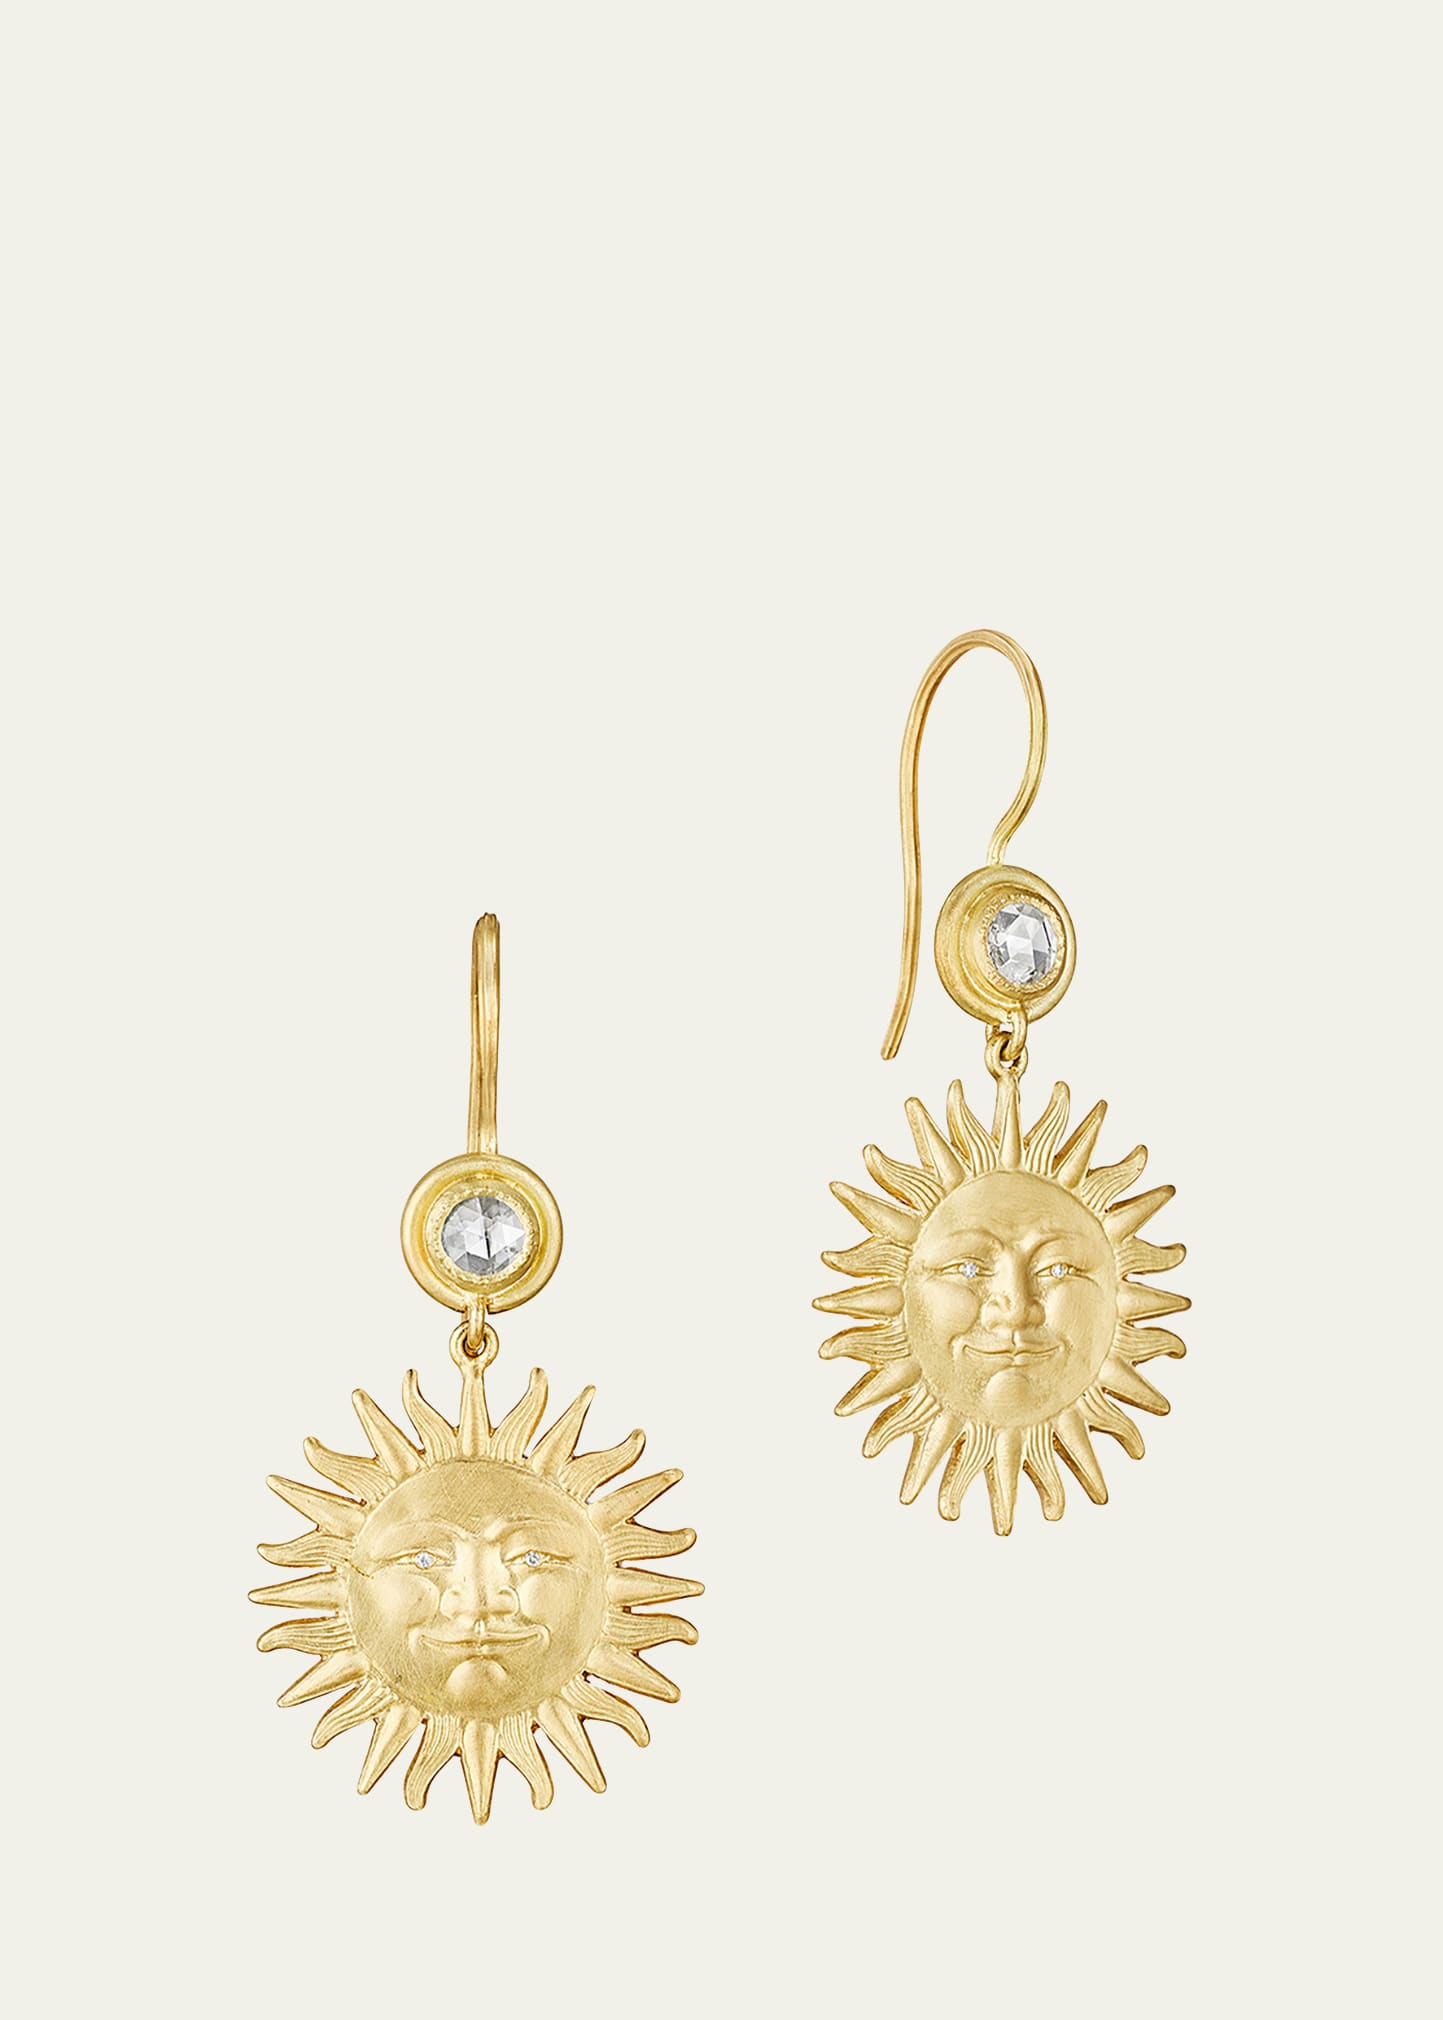 Anthony Lent Sunface Earrings in 18K Gold with Diamonds